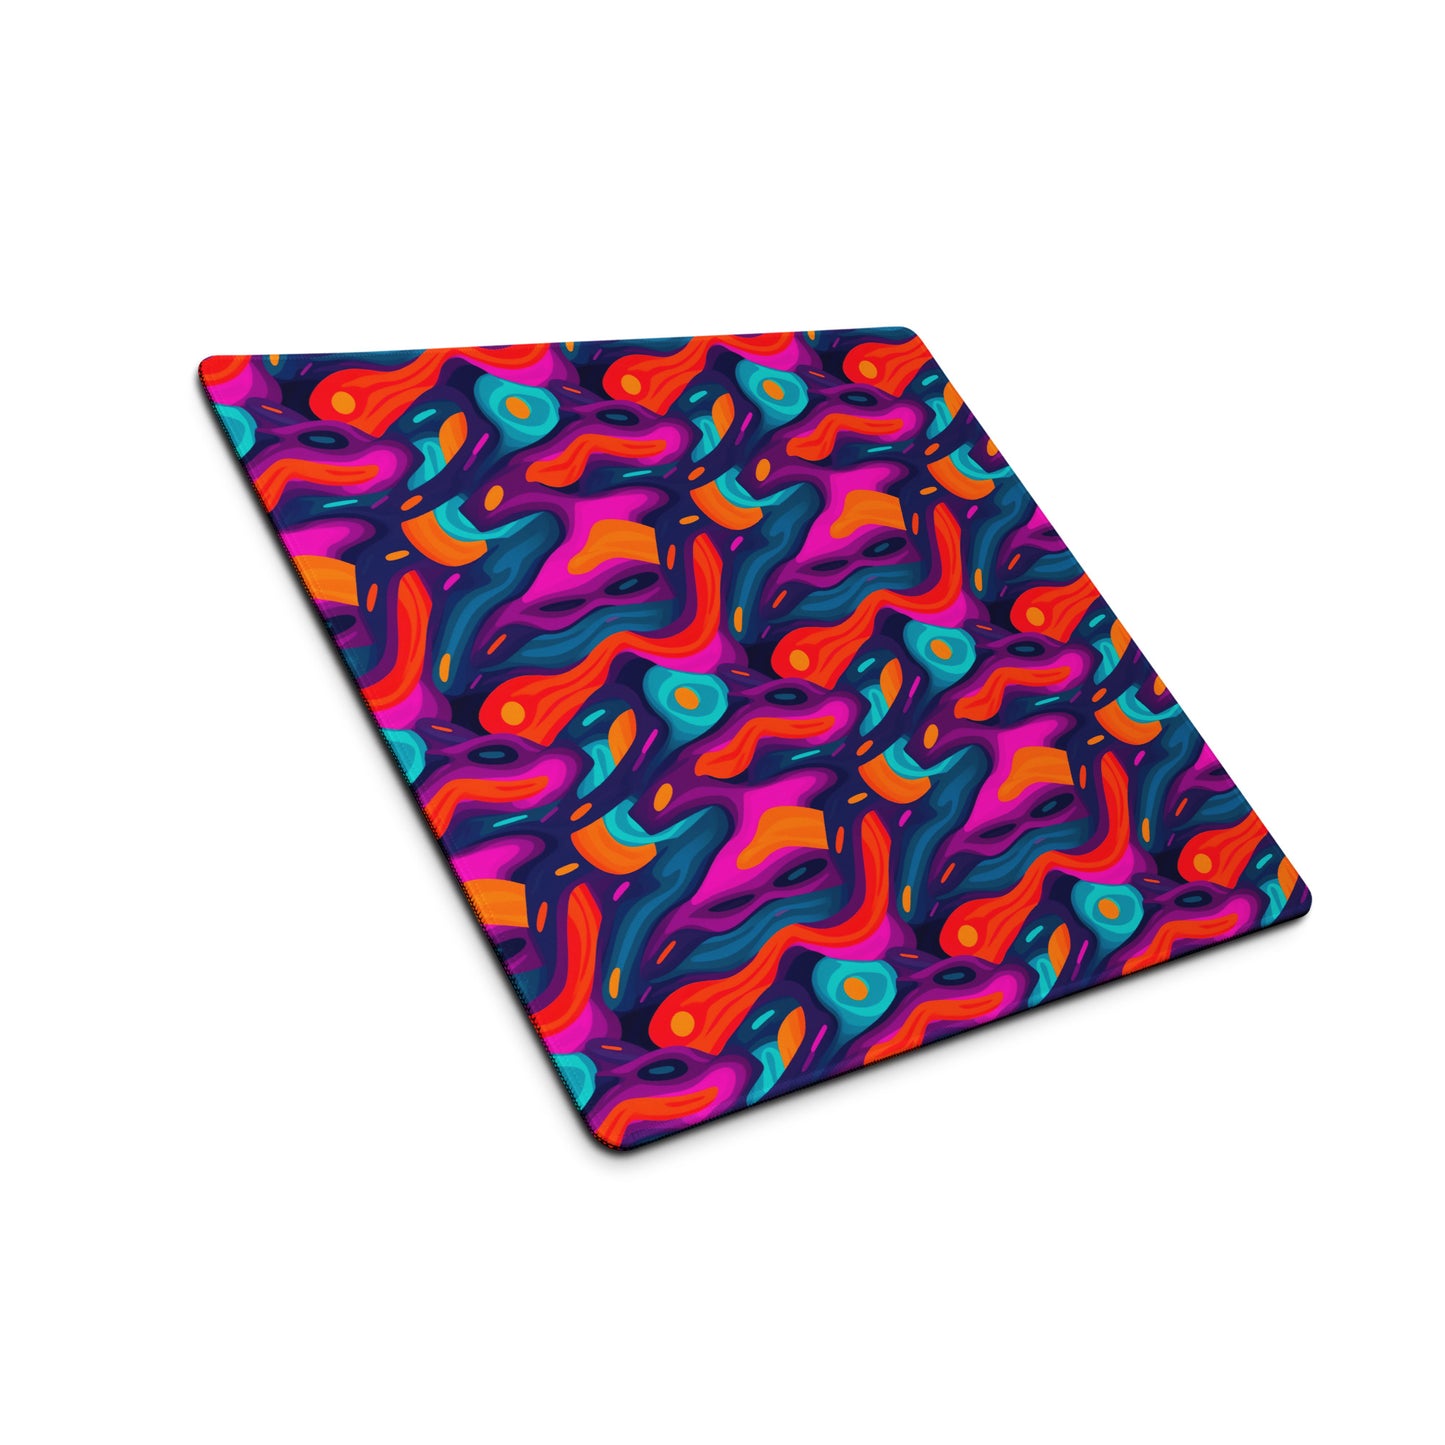 A 18" x 16" desk pad with a wavy abstract pattern on it shown at an angle. Blue, Purple and Red in color.